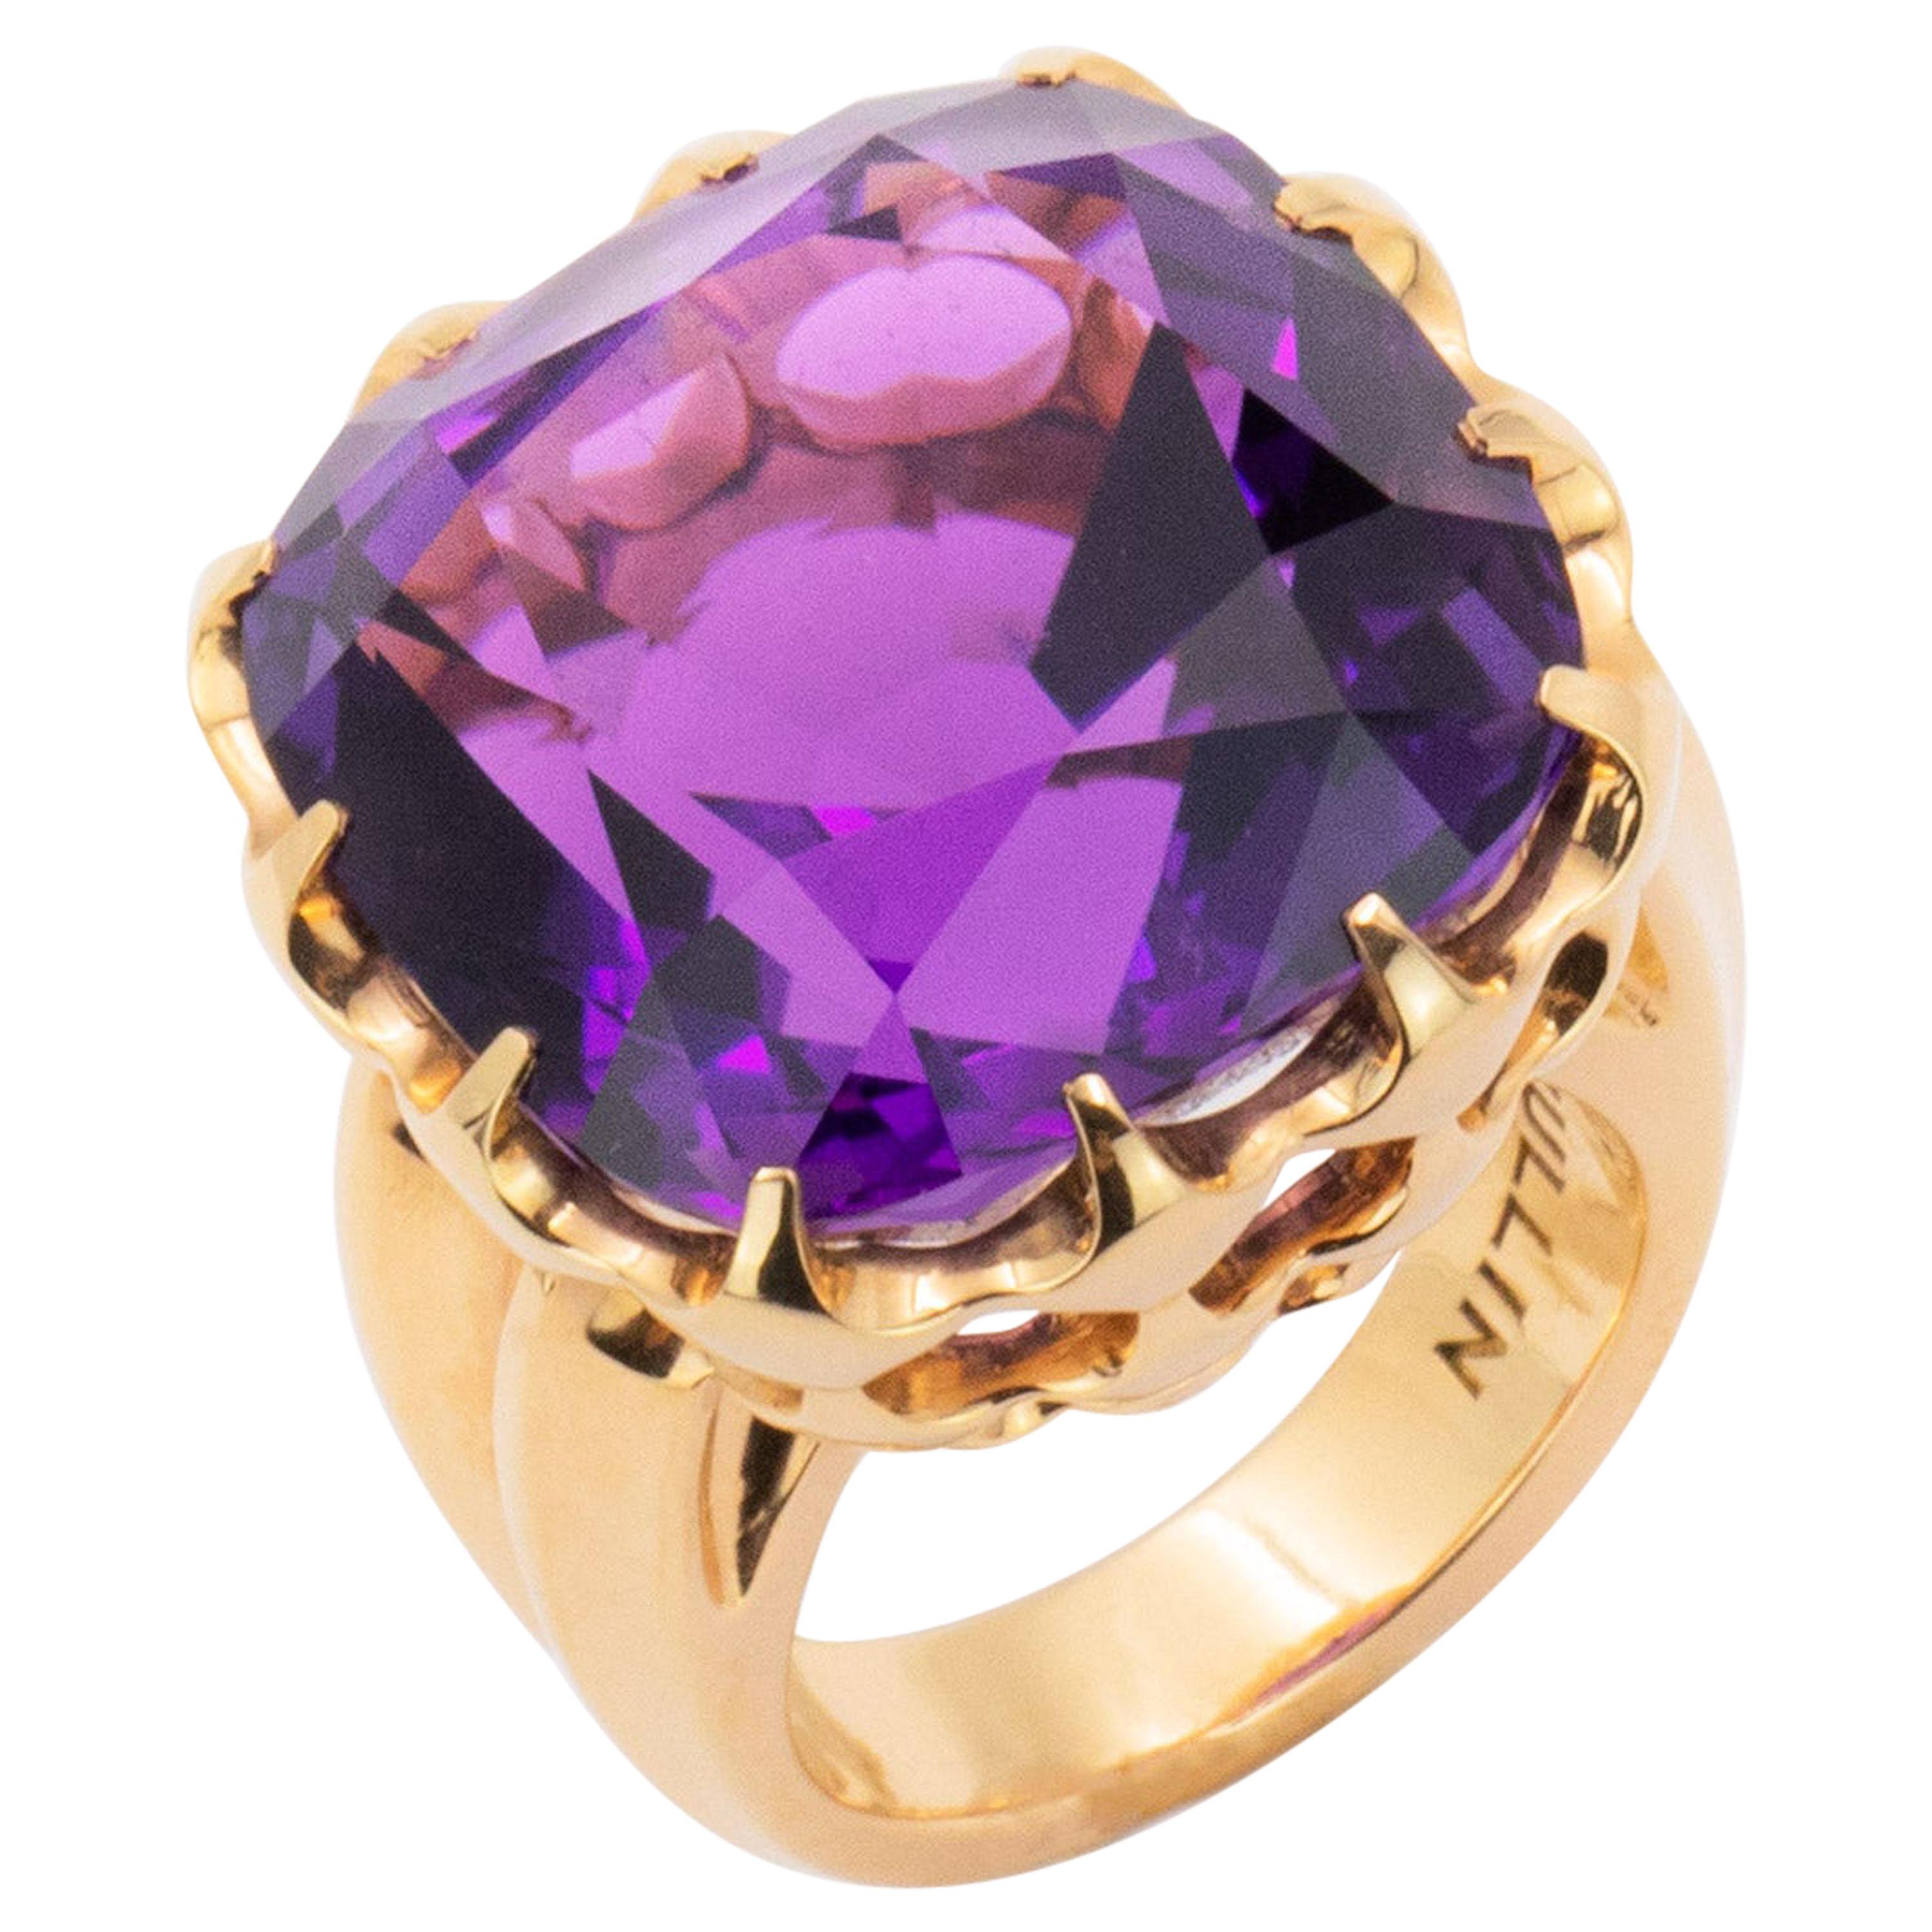 37.38 Carat Handmade Pink Gold Cushion-Cut Amethyst Cocktail Ring For Sale